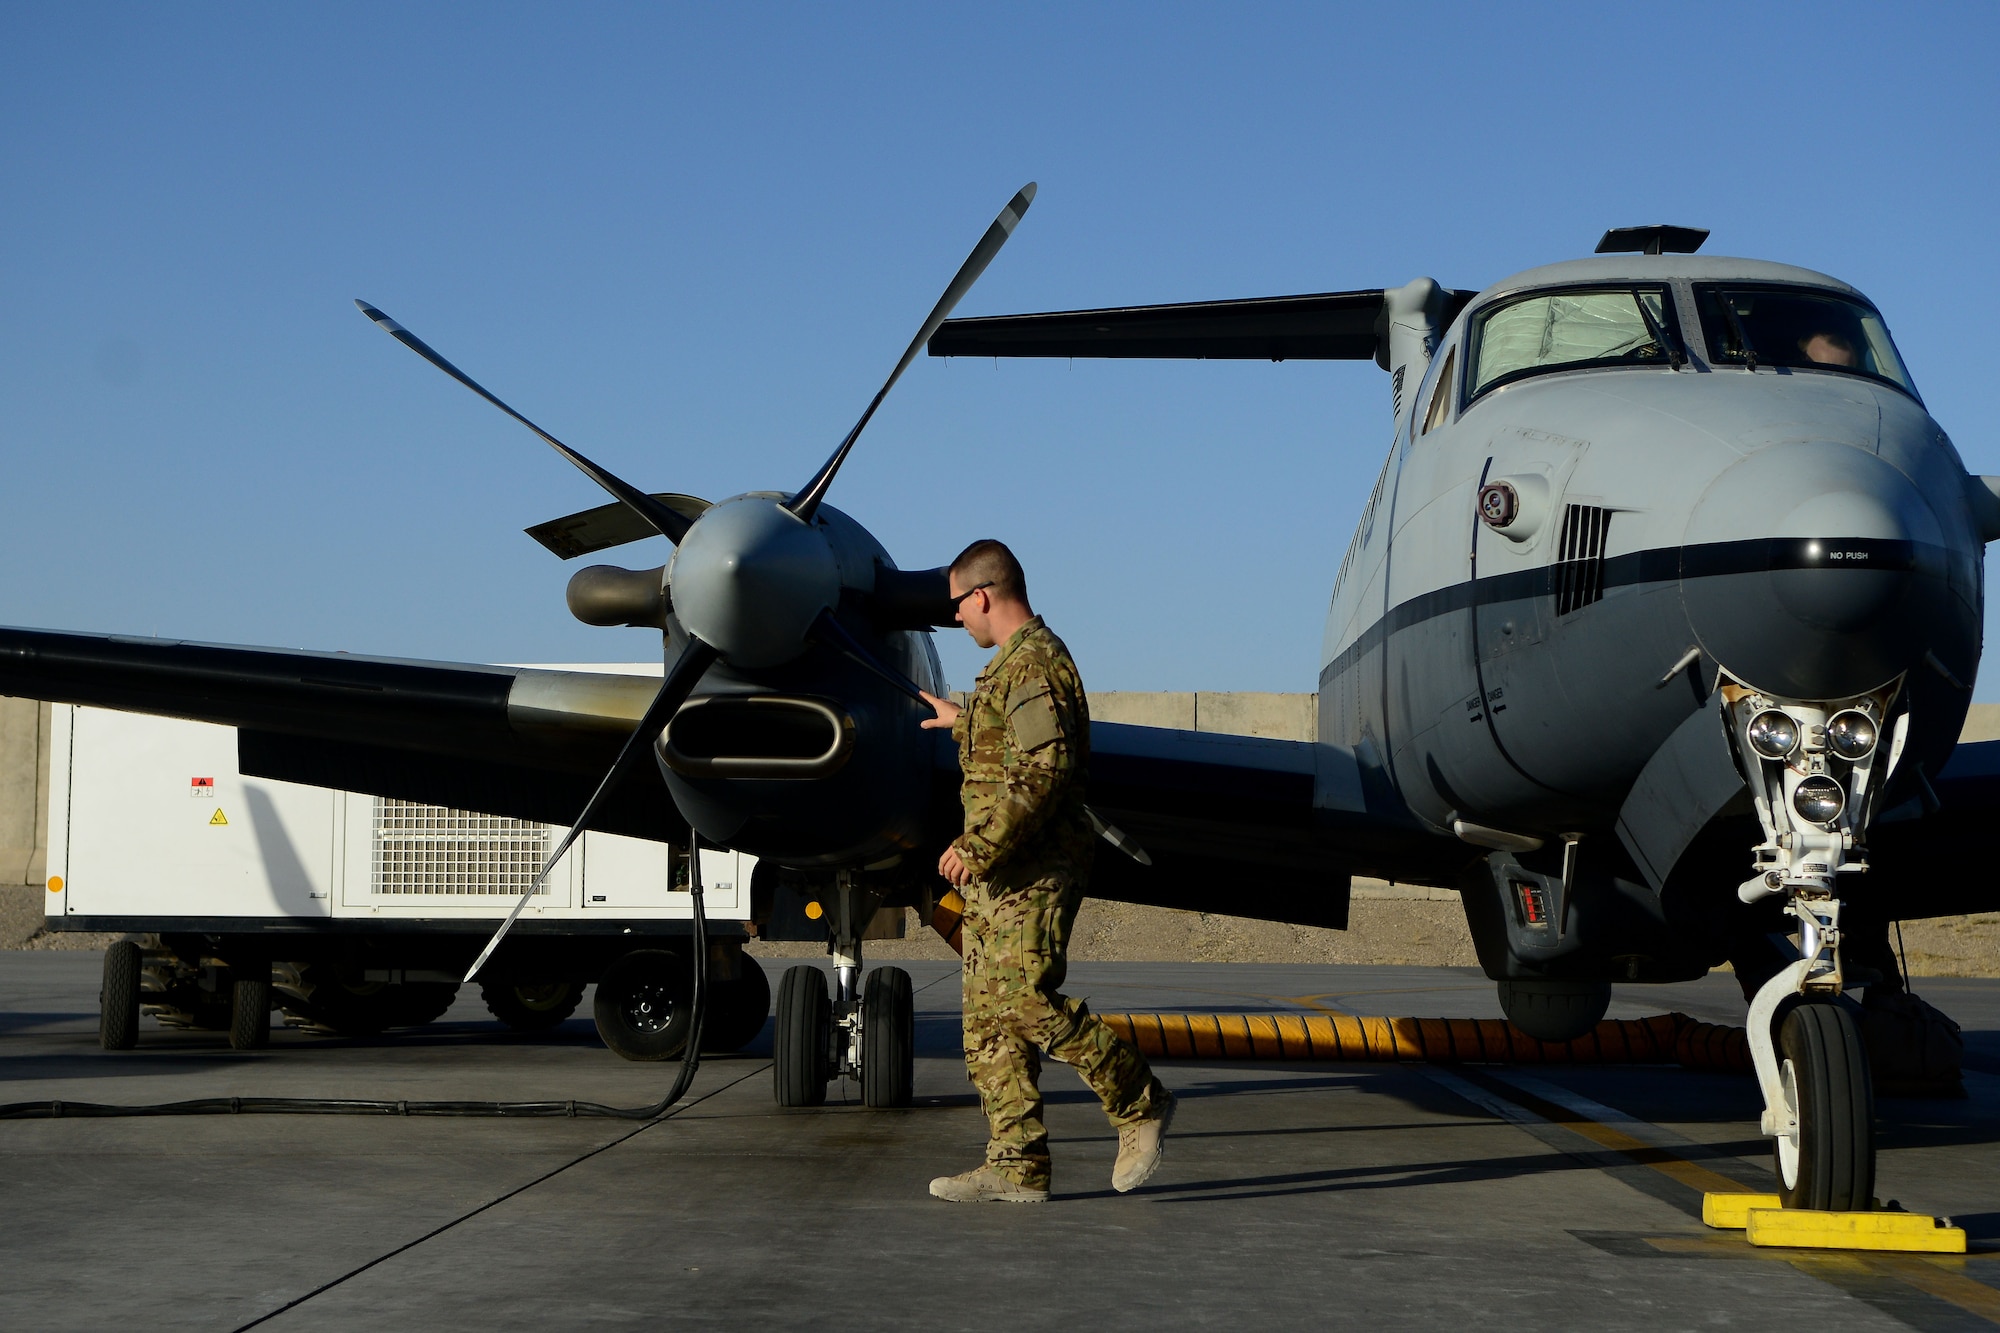 An Airman with the 361st Expeditionary Reconnaissance Squadron inspects an MC-12W Liberty Aug. 20, 2014, before a mission at Kandahar Airfield, Afghanistan. The squadron reached its end of mission in September after four years of operations in Afghanistan. (U.S. Air Force photo/Staff Sgt. Evelyn Chavez)